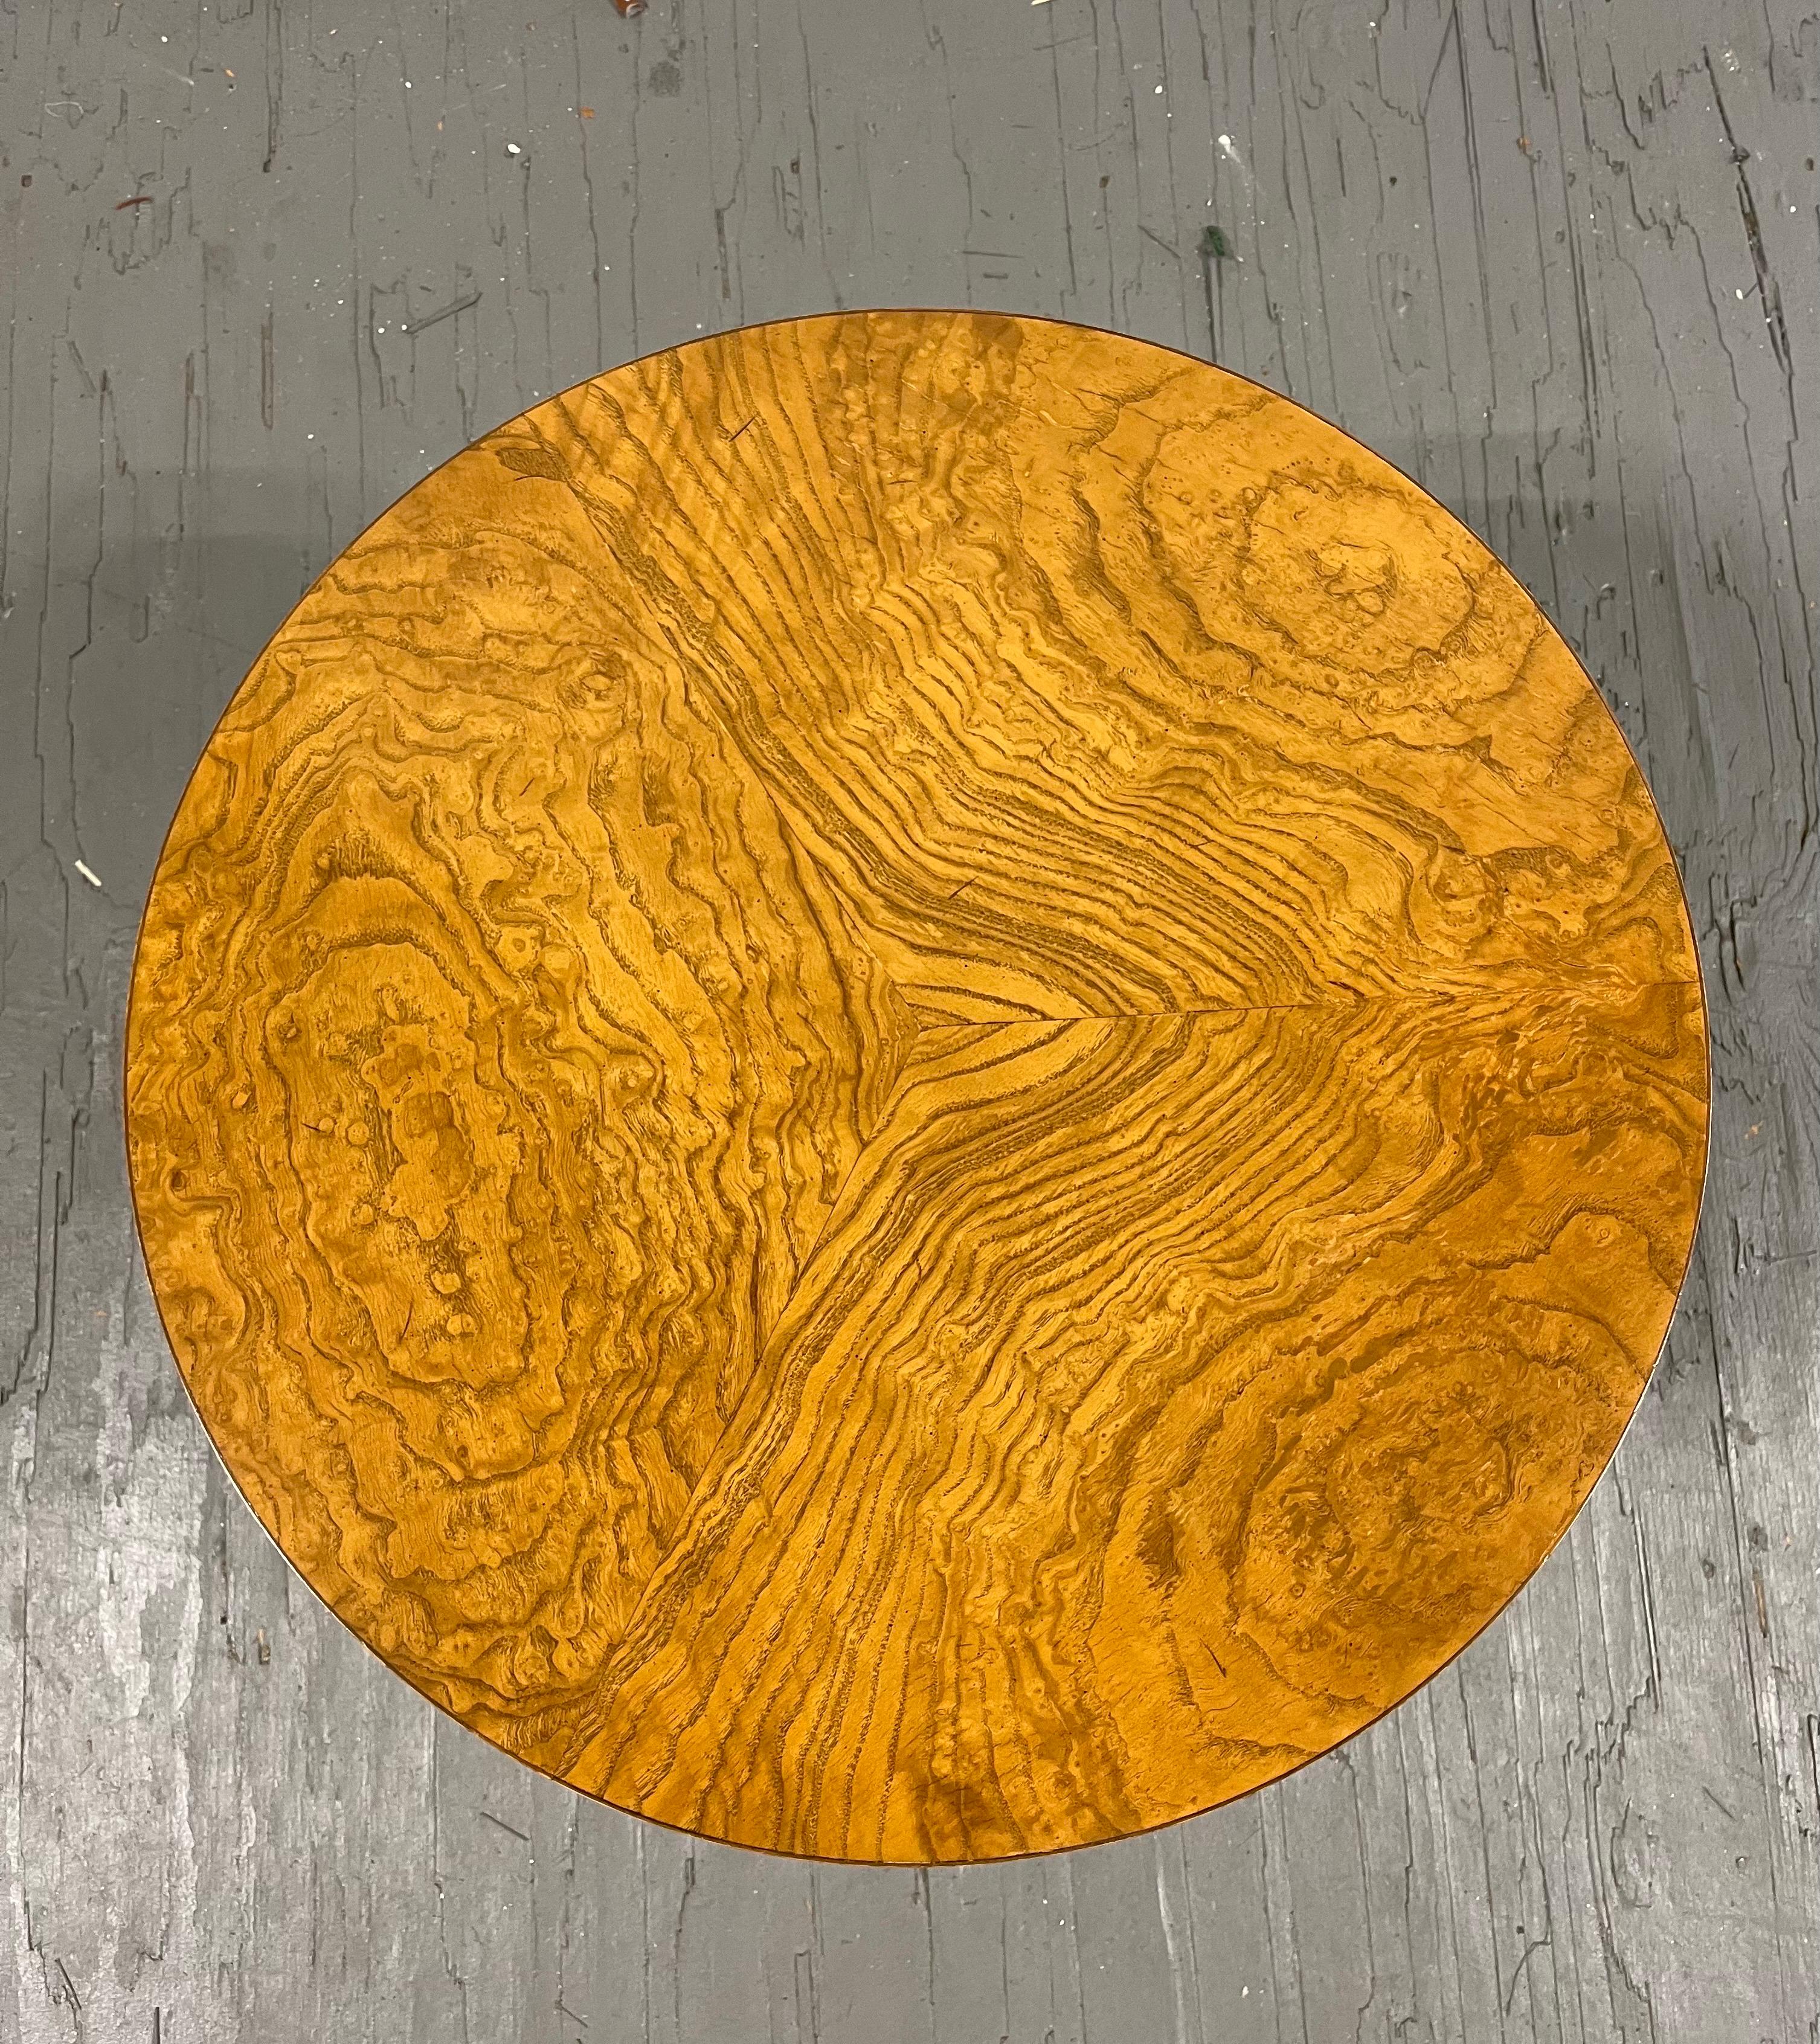 American Pavane by Tomlinson Burl Table For Sale